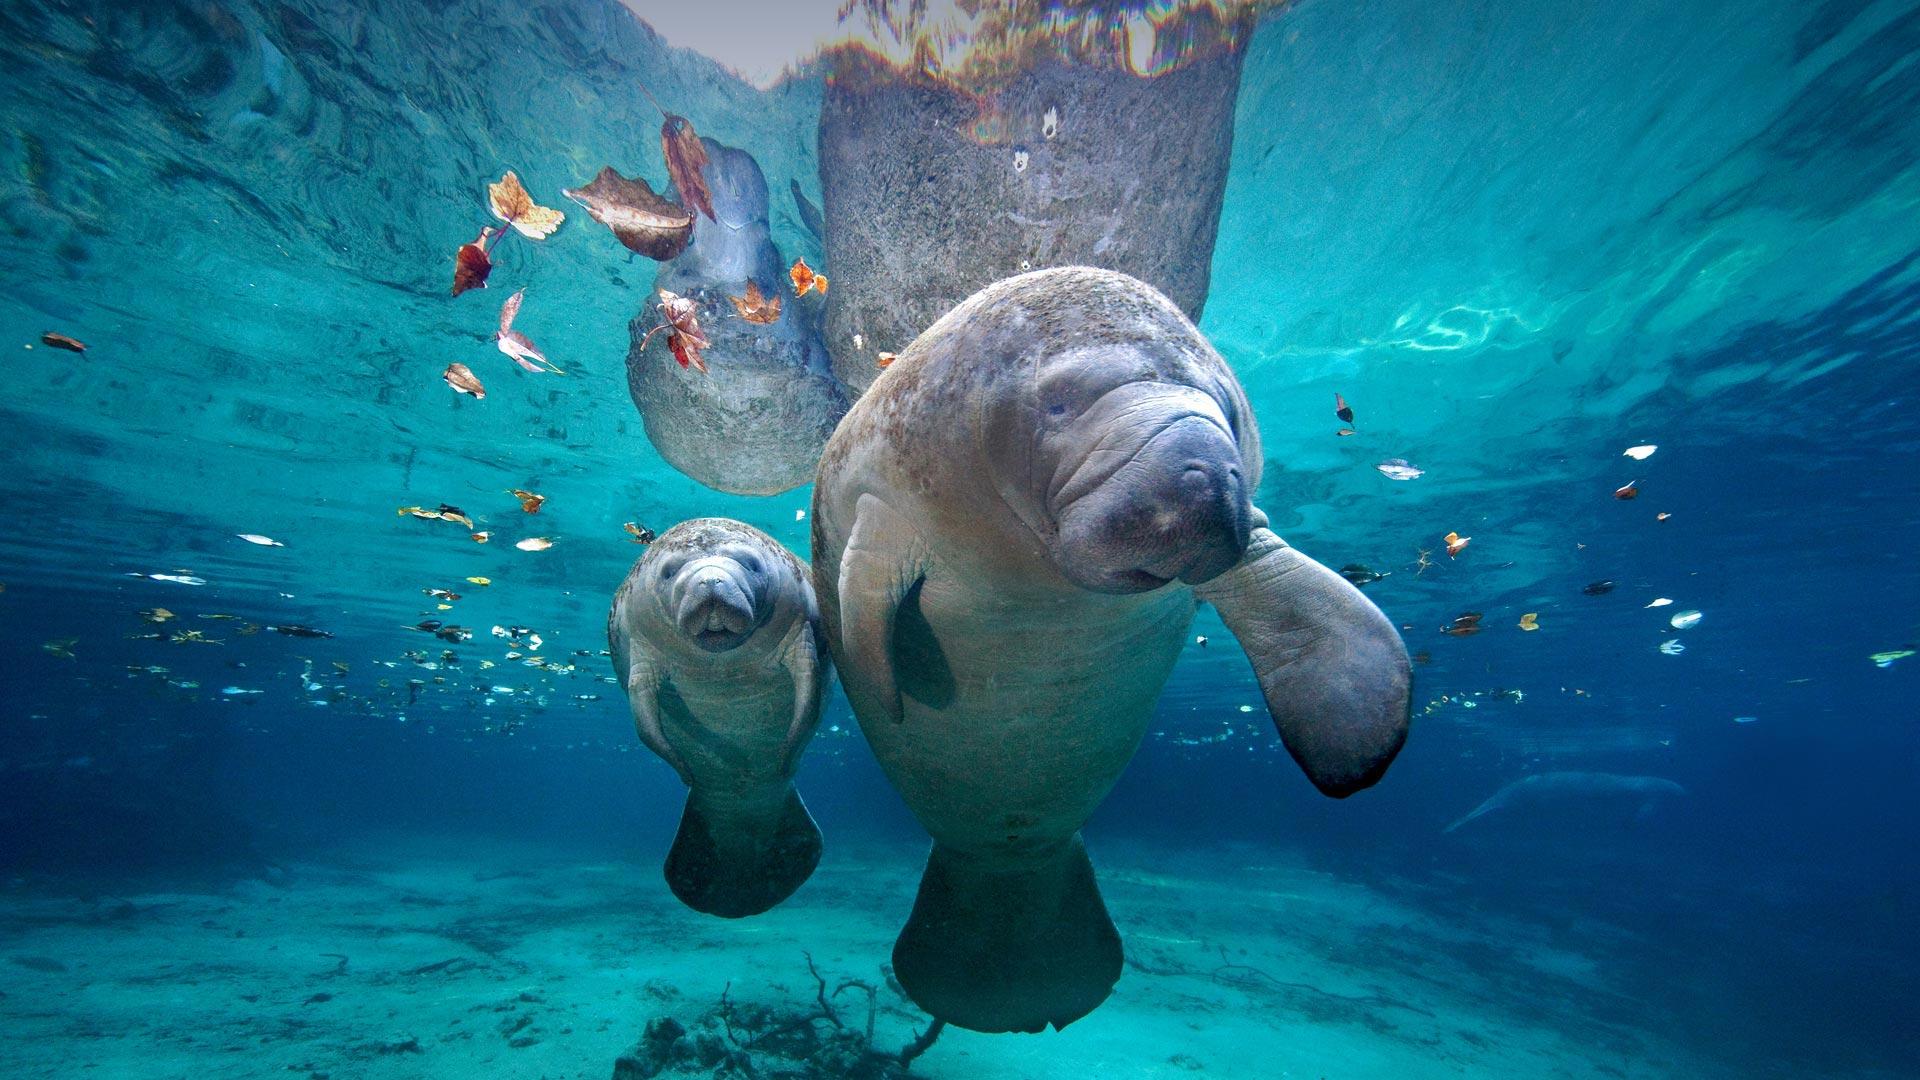 Manatee Wallpapers Top Free Manatee Backgrounds Wallpaperaccess Images, Photos, Reviews